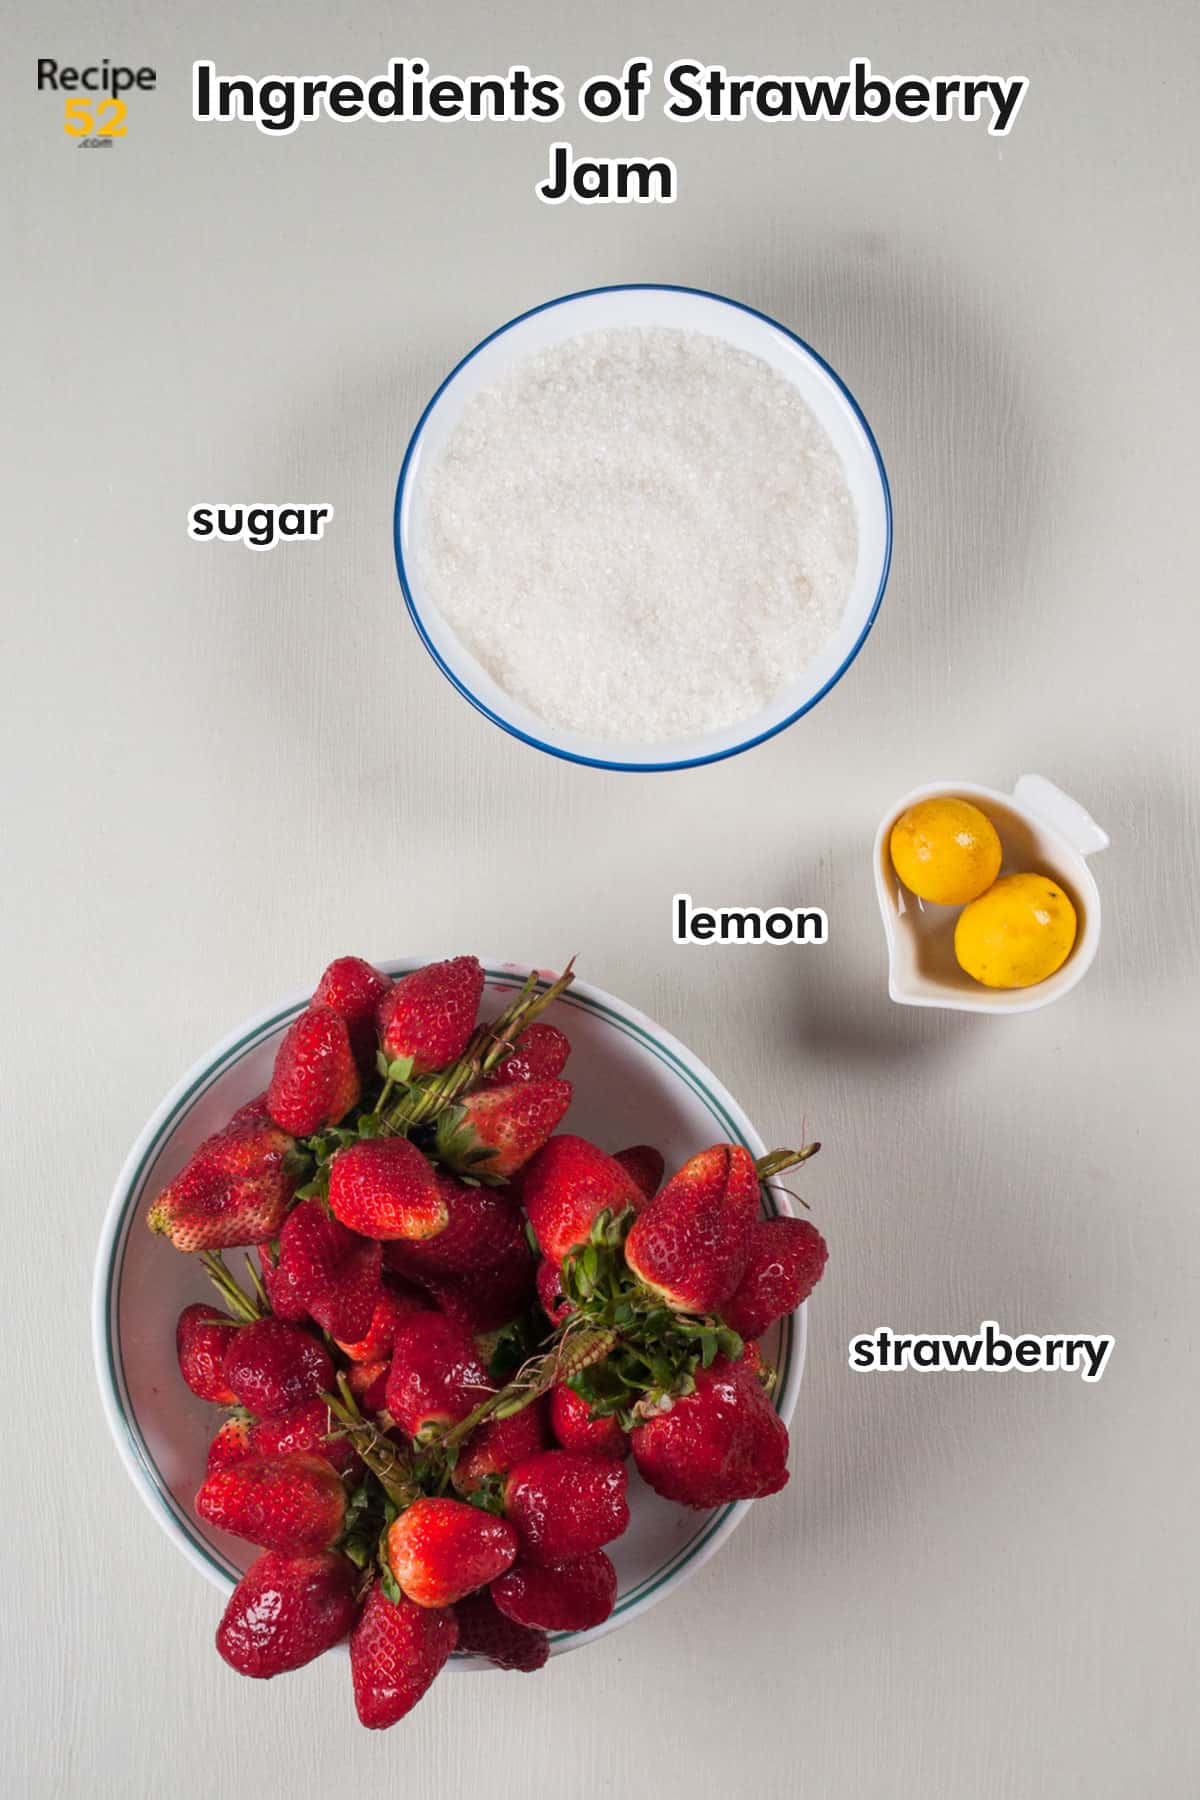 Ingredients for strawberry jam.